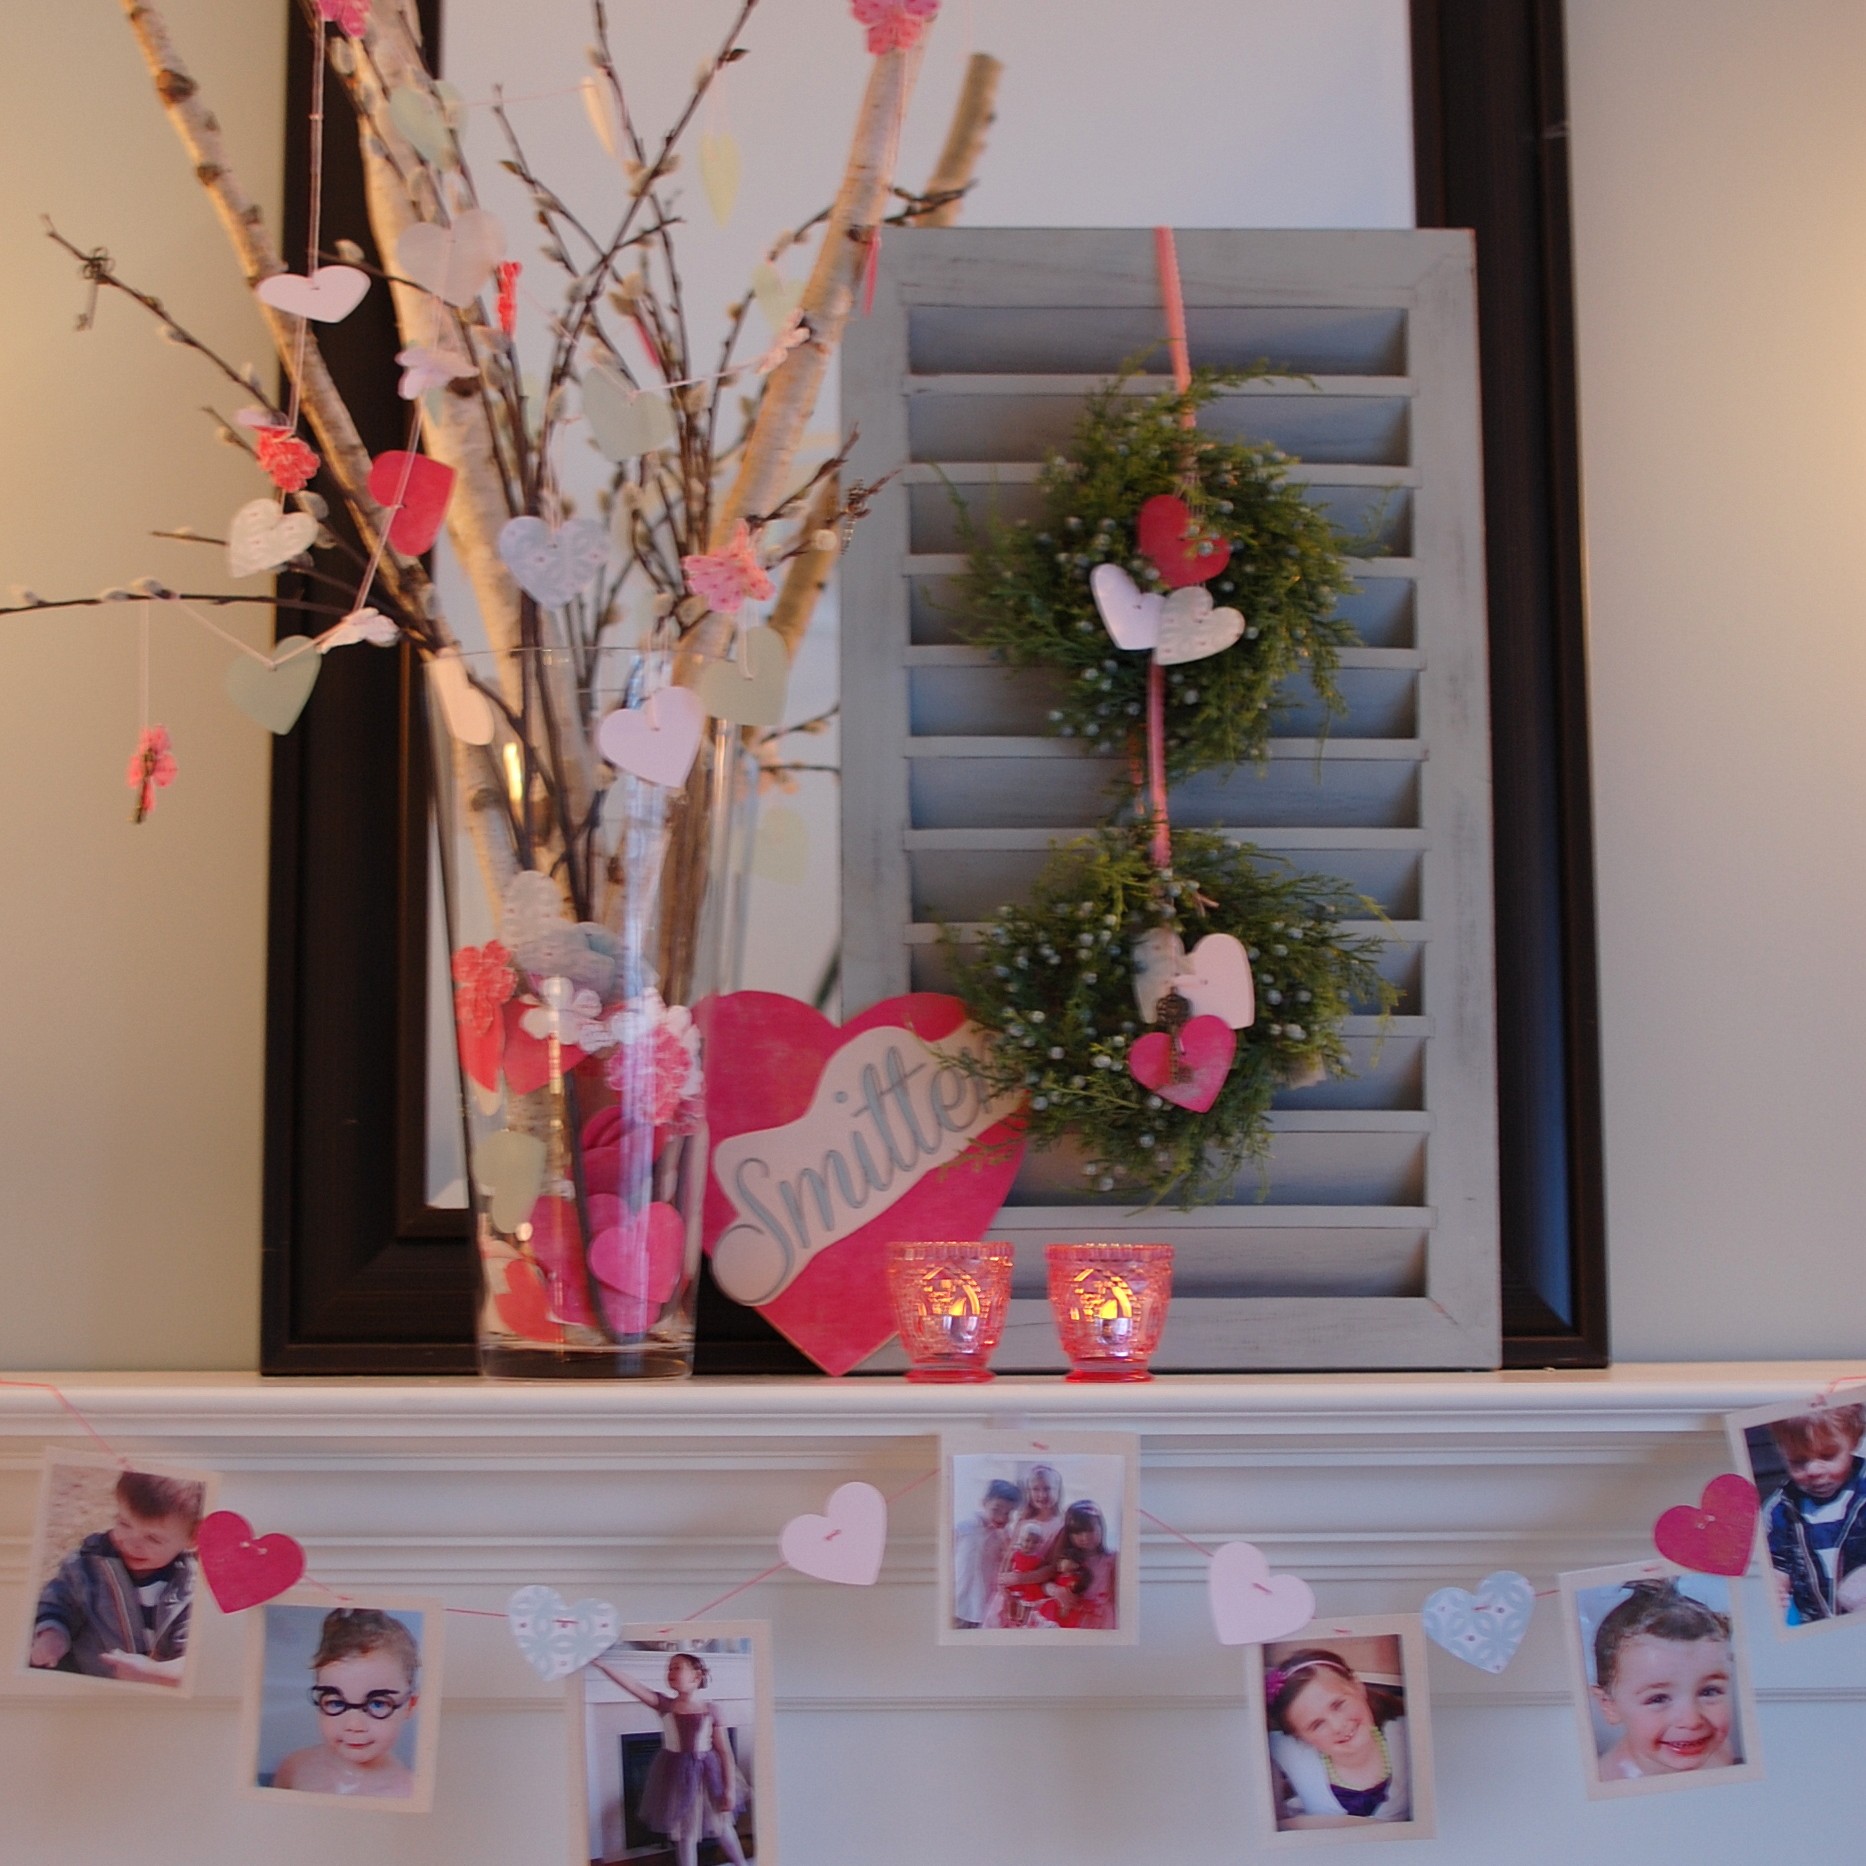 Best-Valentine-Fireplace-Mantel-Decorating-Ideas-with-Creative-Round-Pine-Arrangement-also-Cute-Family-Photos-Frame-Hanger-Ideas-for-Lovely-Valentine-White-Fireplace-Mantel-Decorating-IDEAS